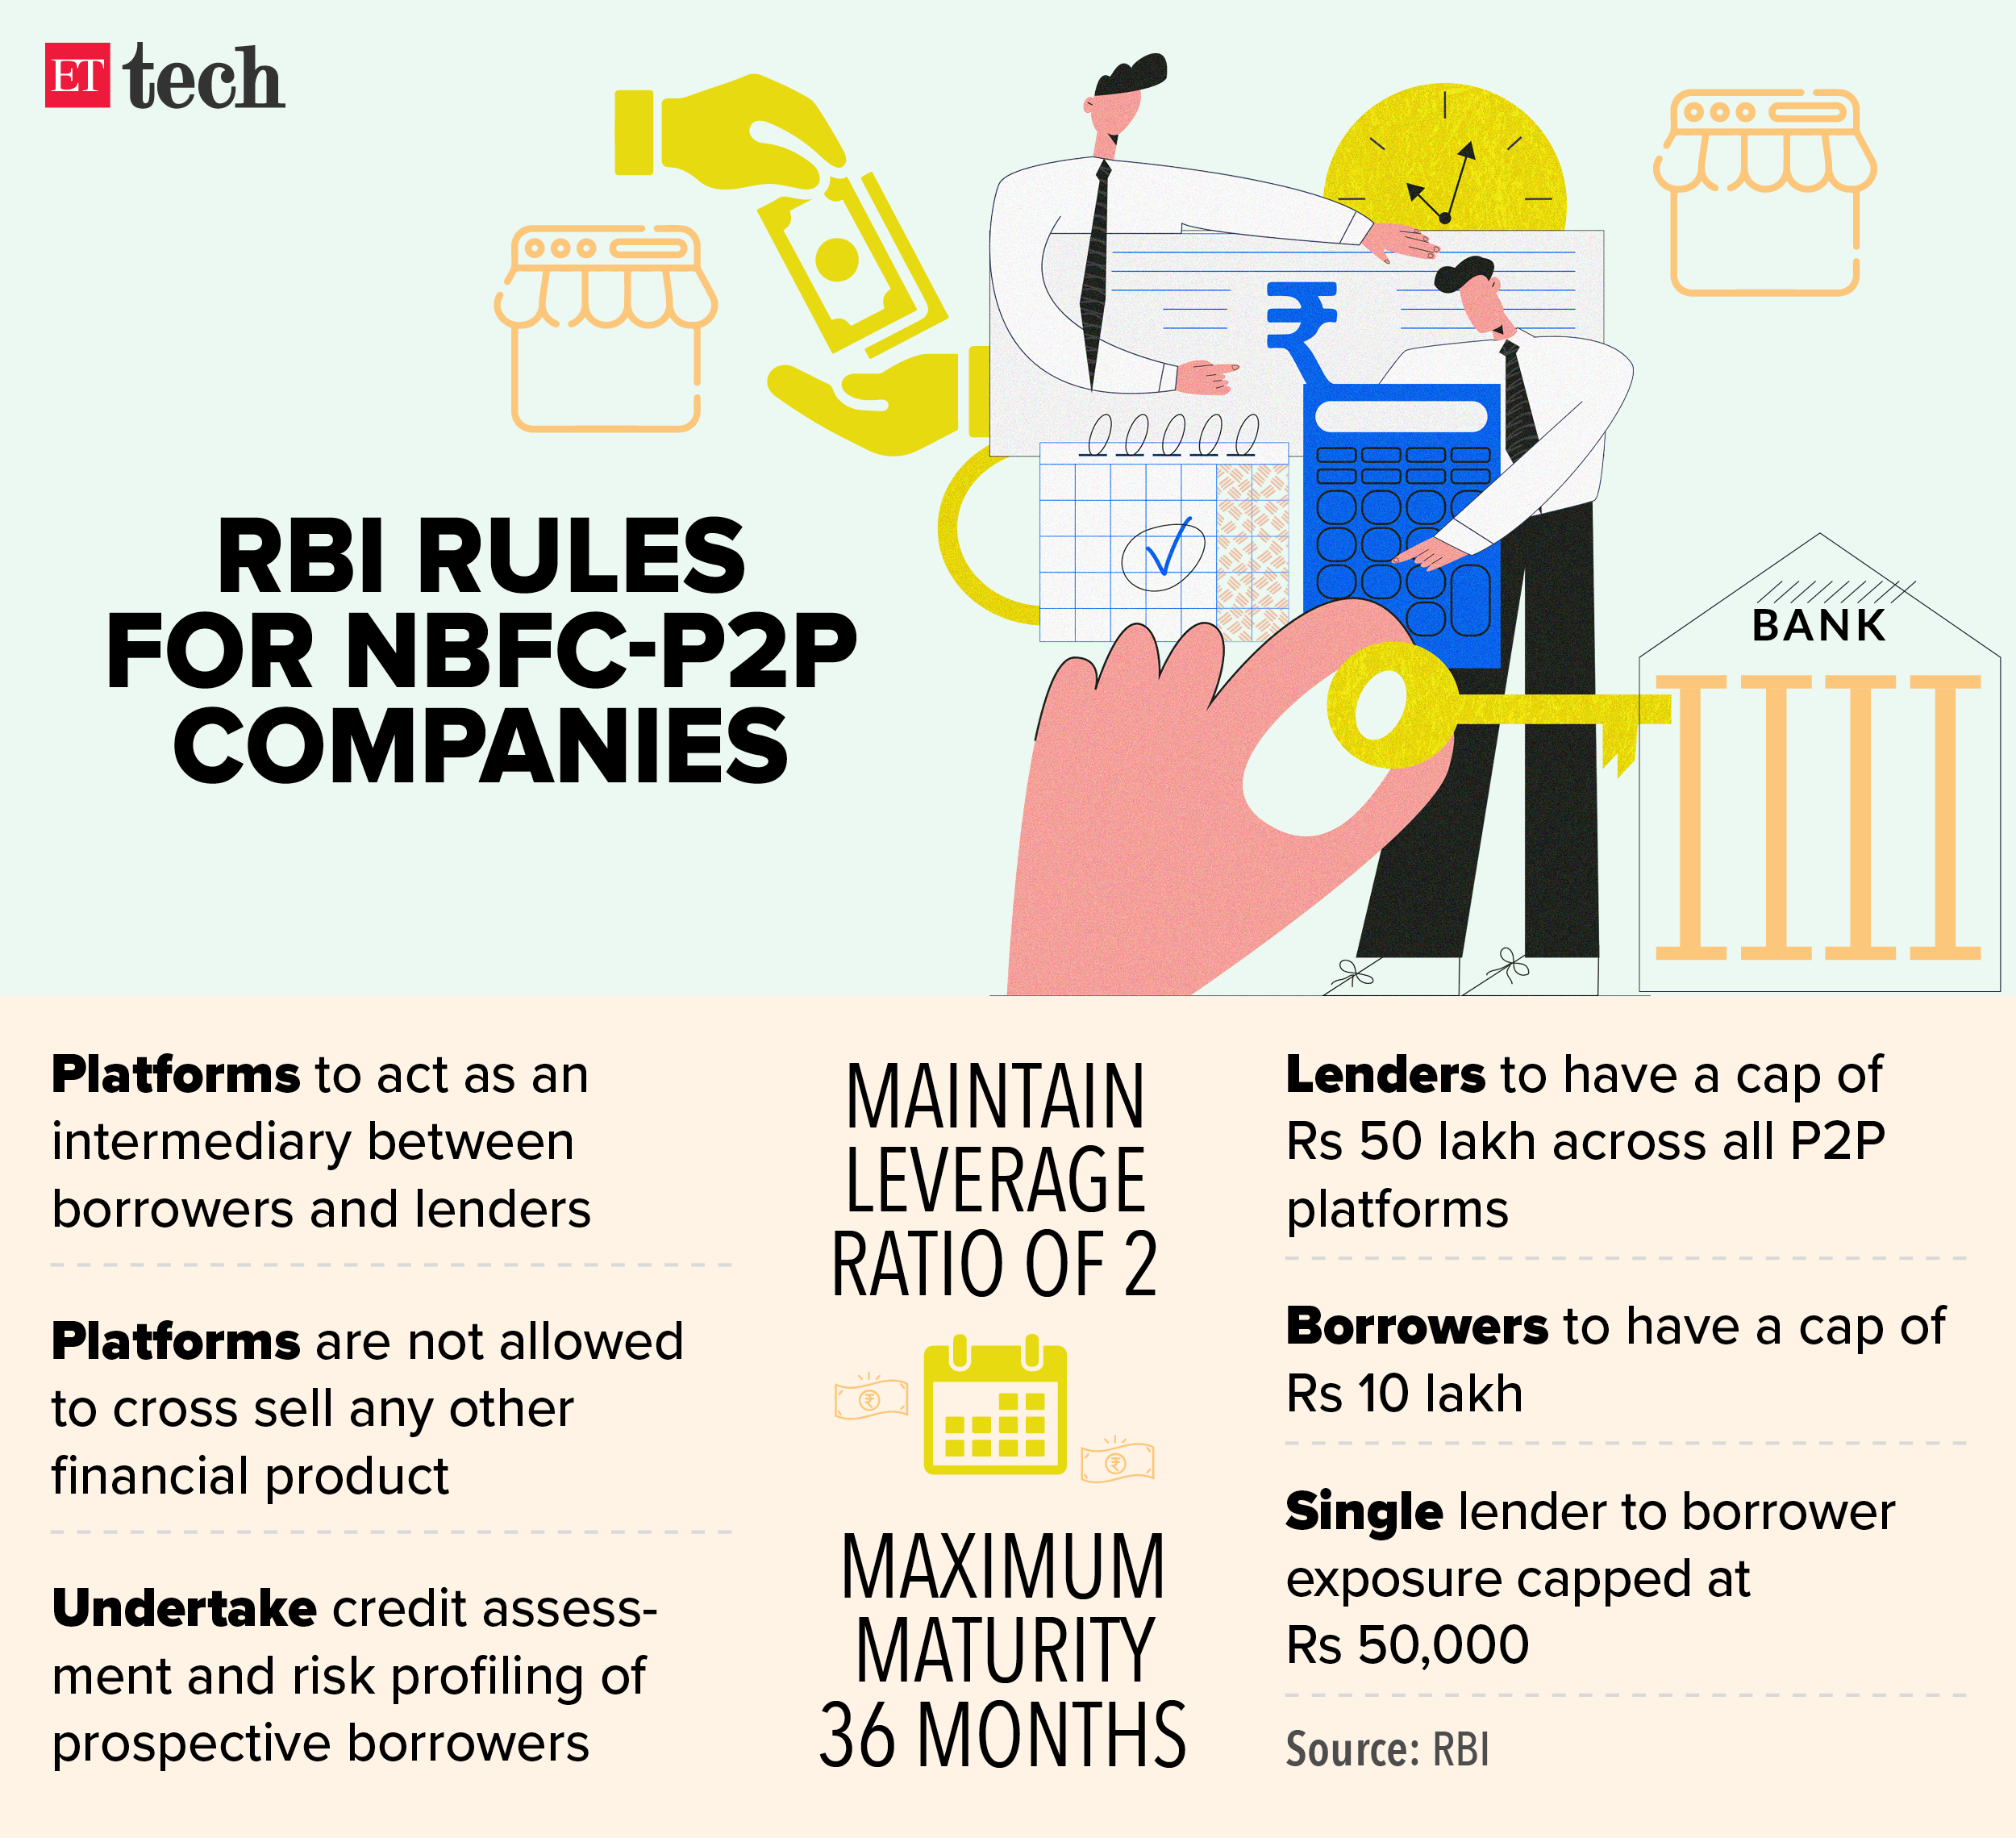 RBI rules for NBFC